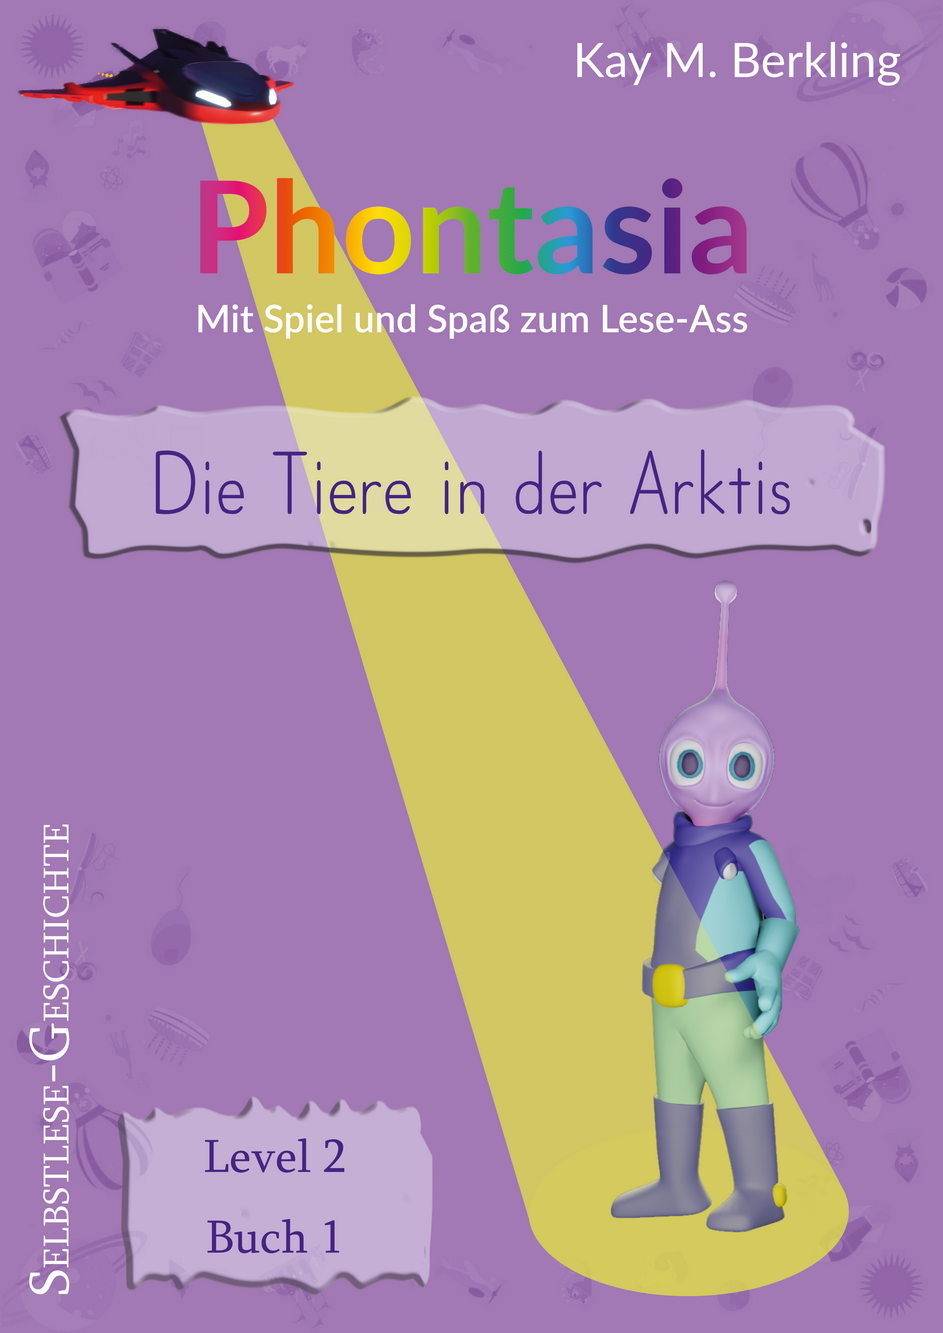 Phontasia: Cover Selbstlese-Geschichte Level 2.1